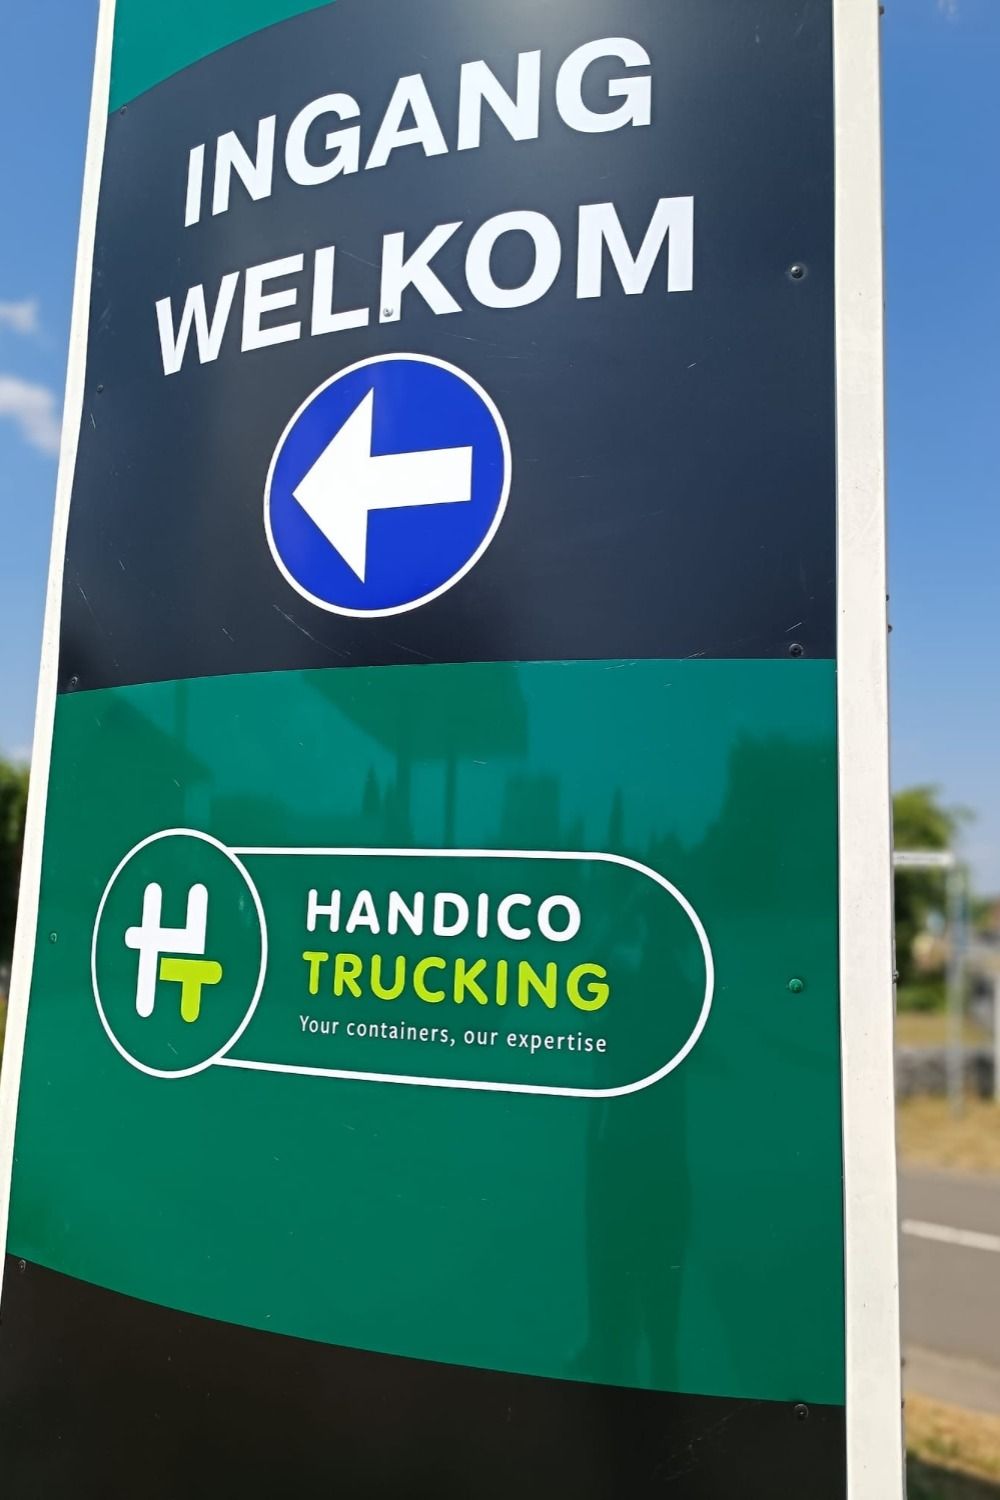 Handico Trucking's new welcome sign at the truck entrance